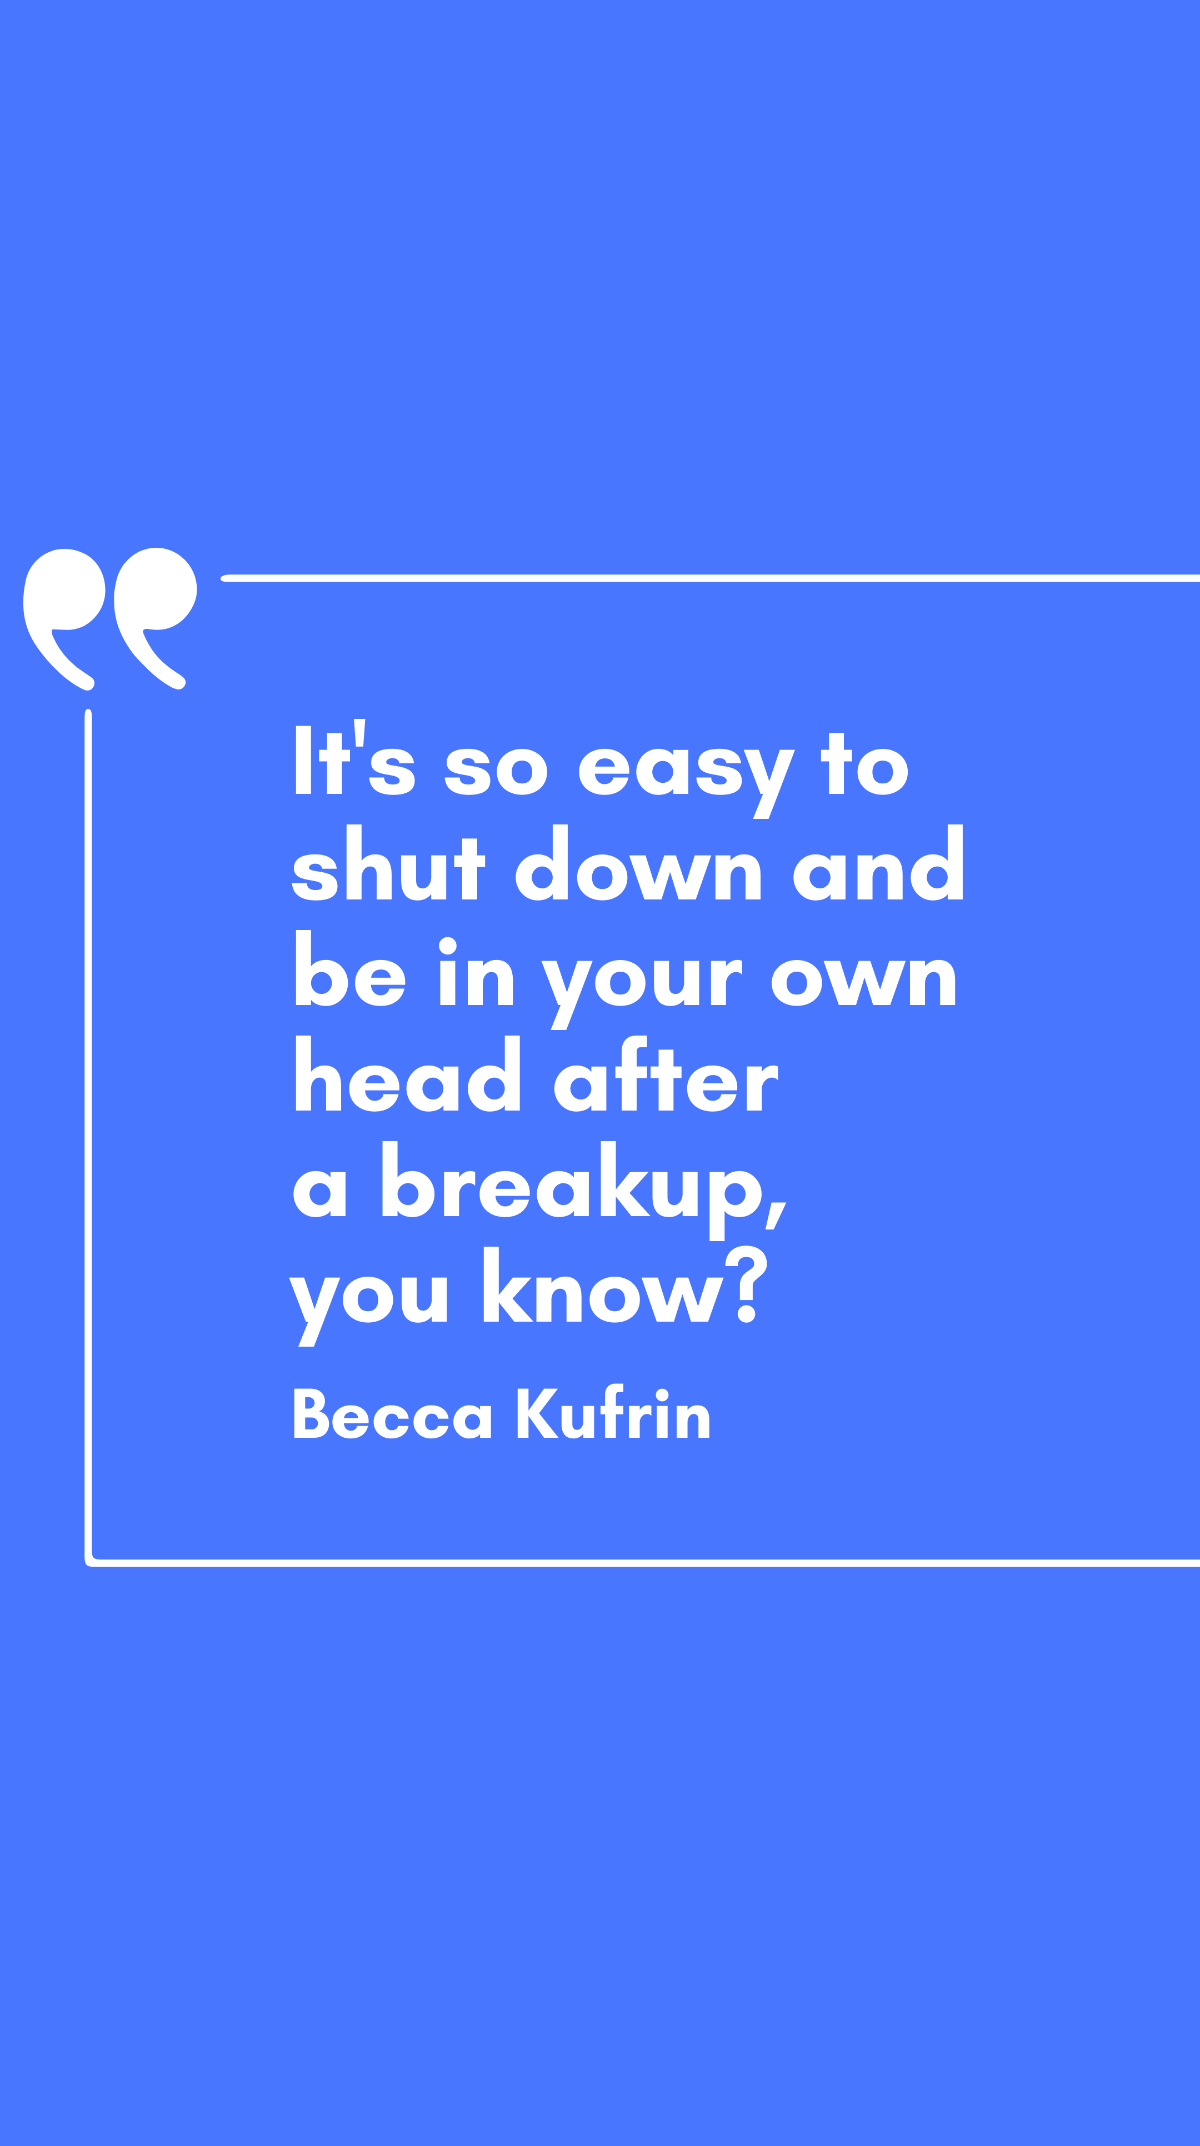 Free Becca Kufrin - It's so easy to shut down and be in your own head after a breakup, you know? Template